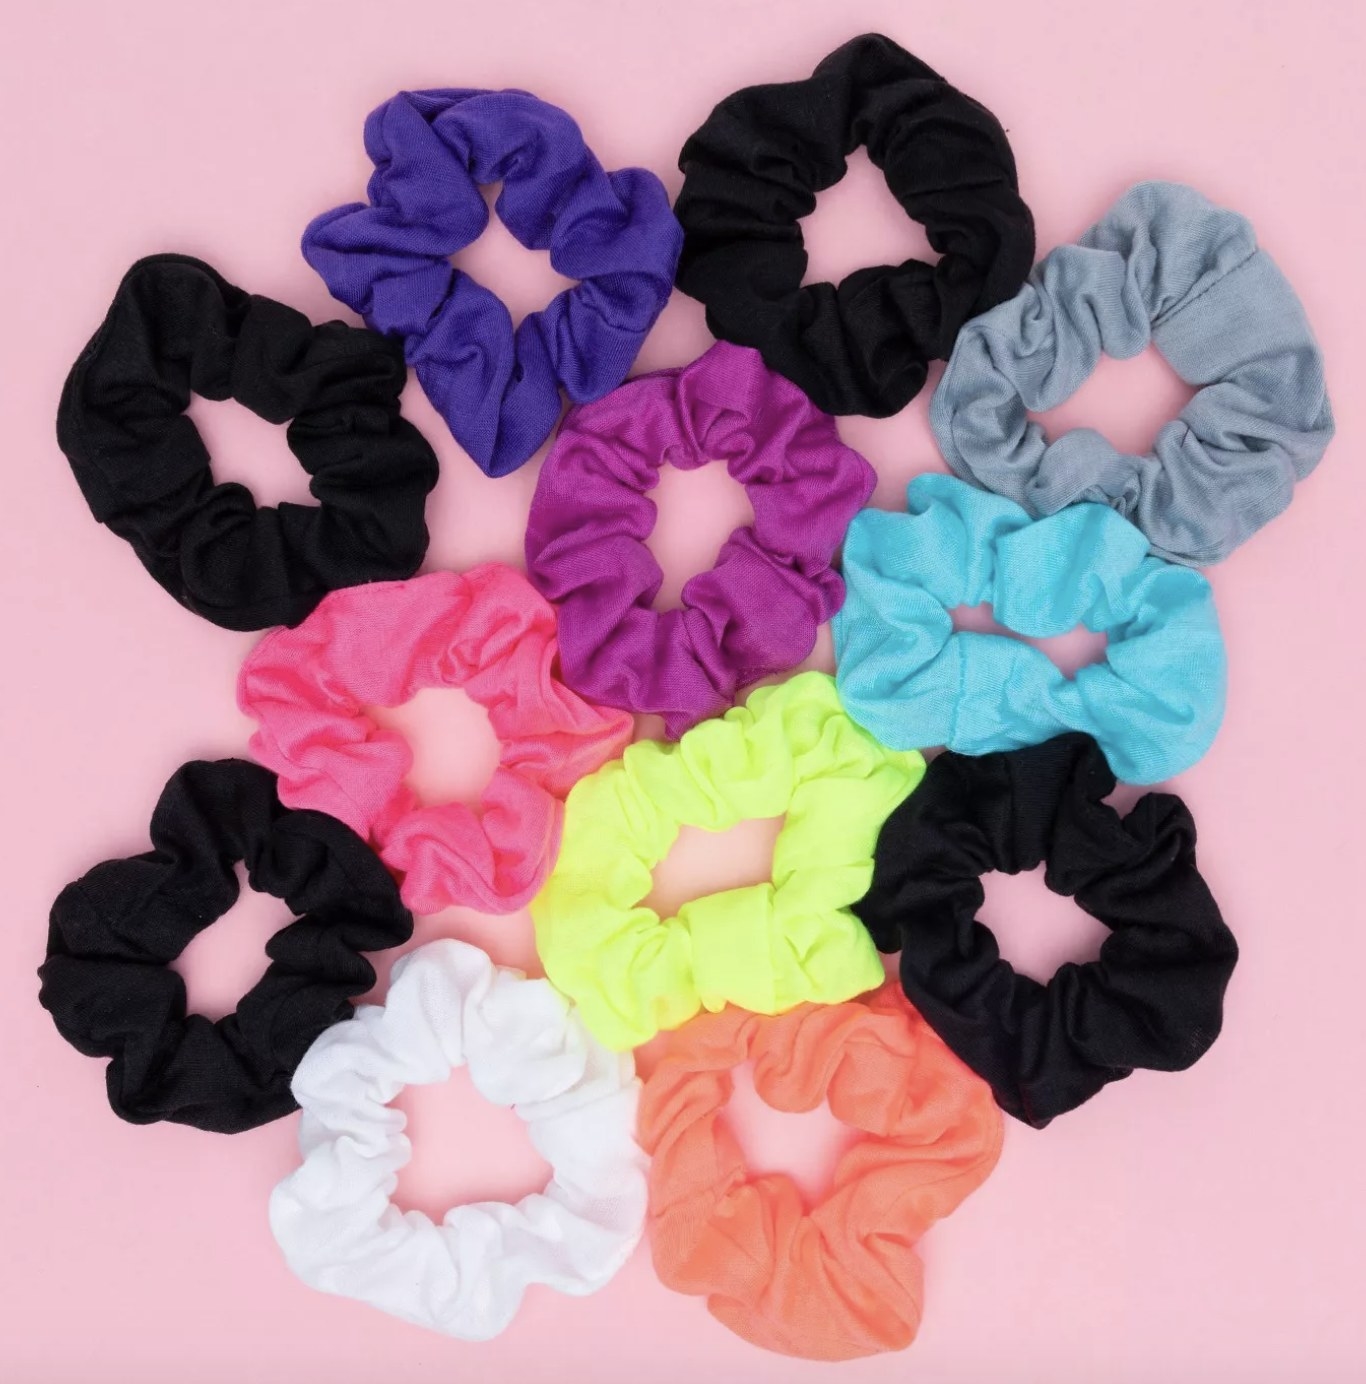 the pack of scrunchies